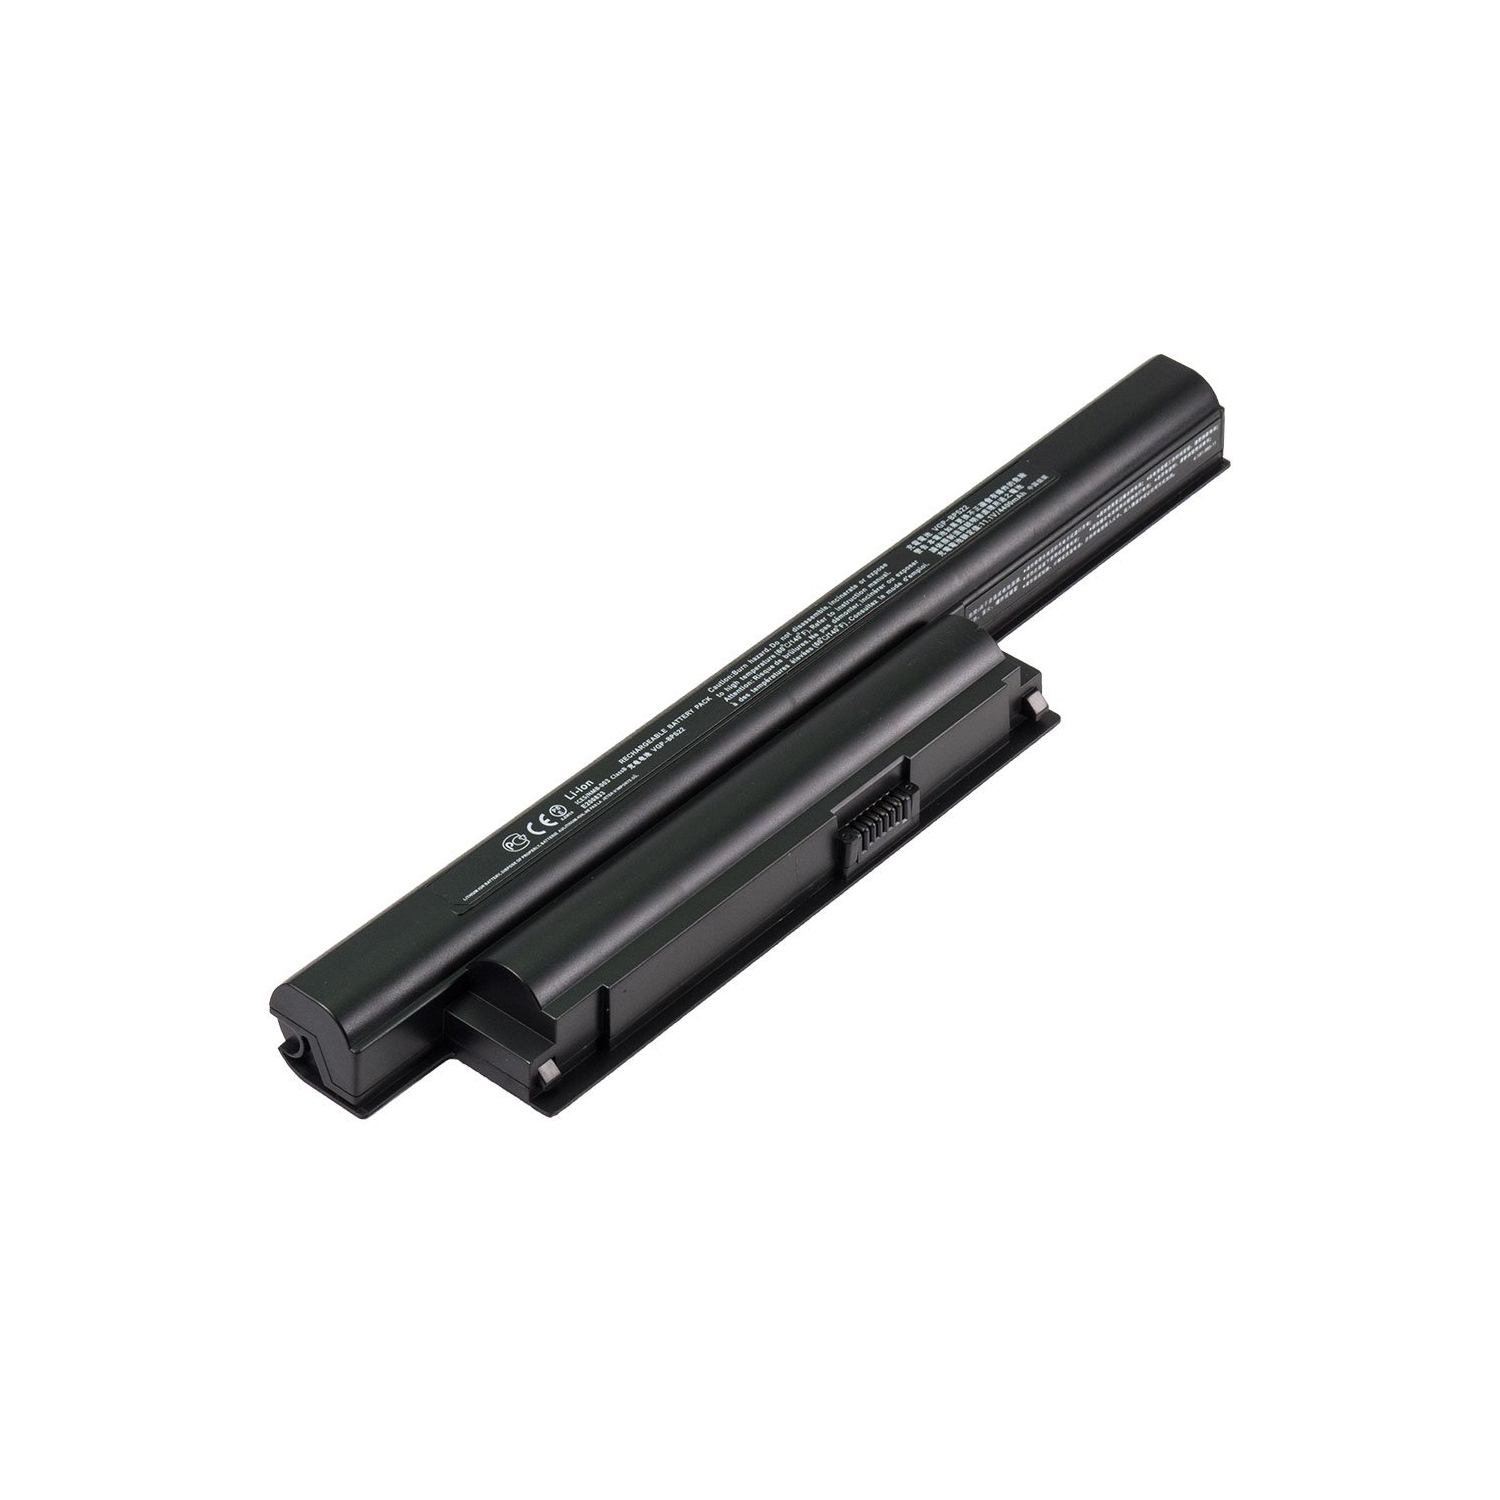 Laptop Battery Replacement for Sony VPCEB12FX/BIC, VGP-BPL22, VGP-BPS22, VGP-BPS22/A, VGP-BPS22A